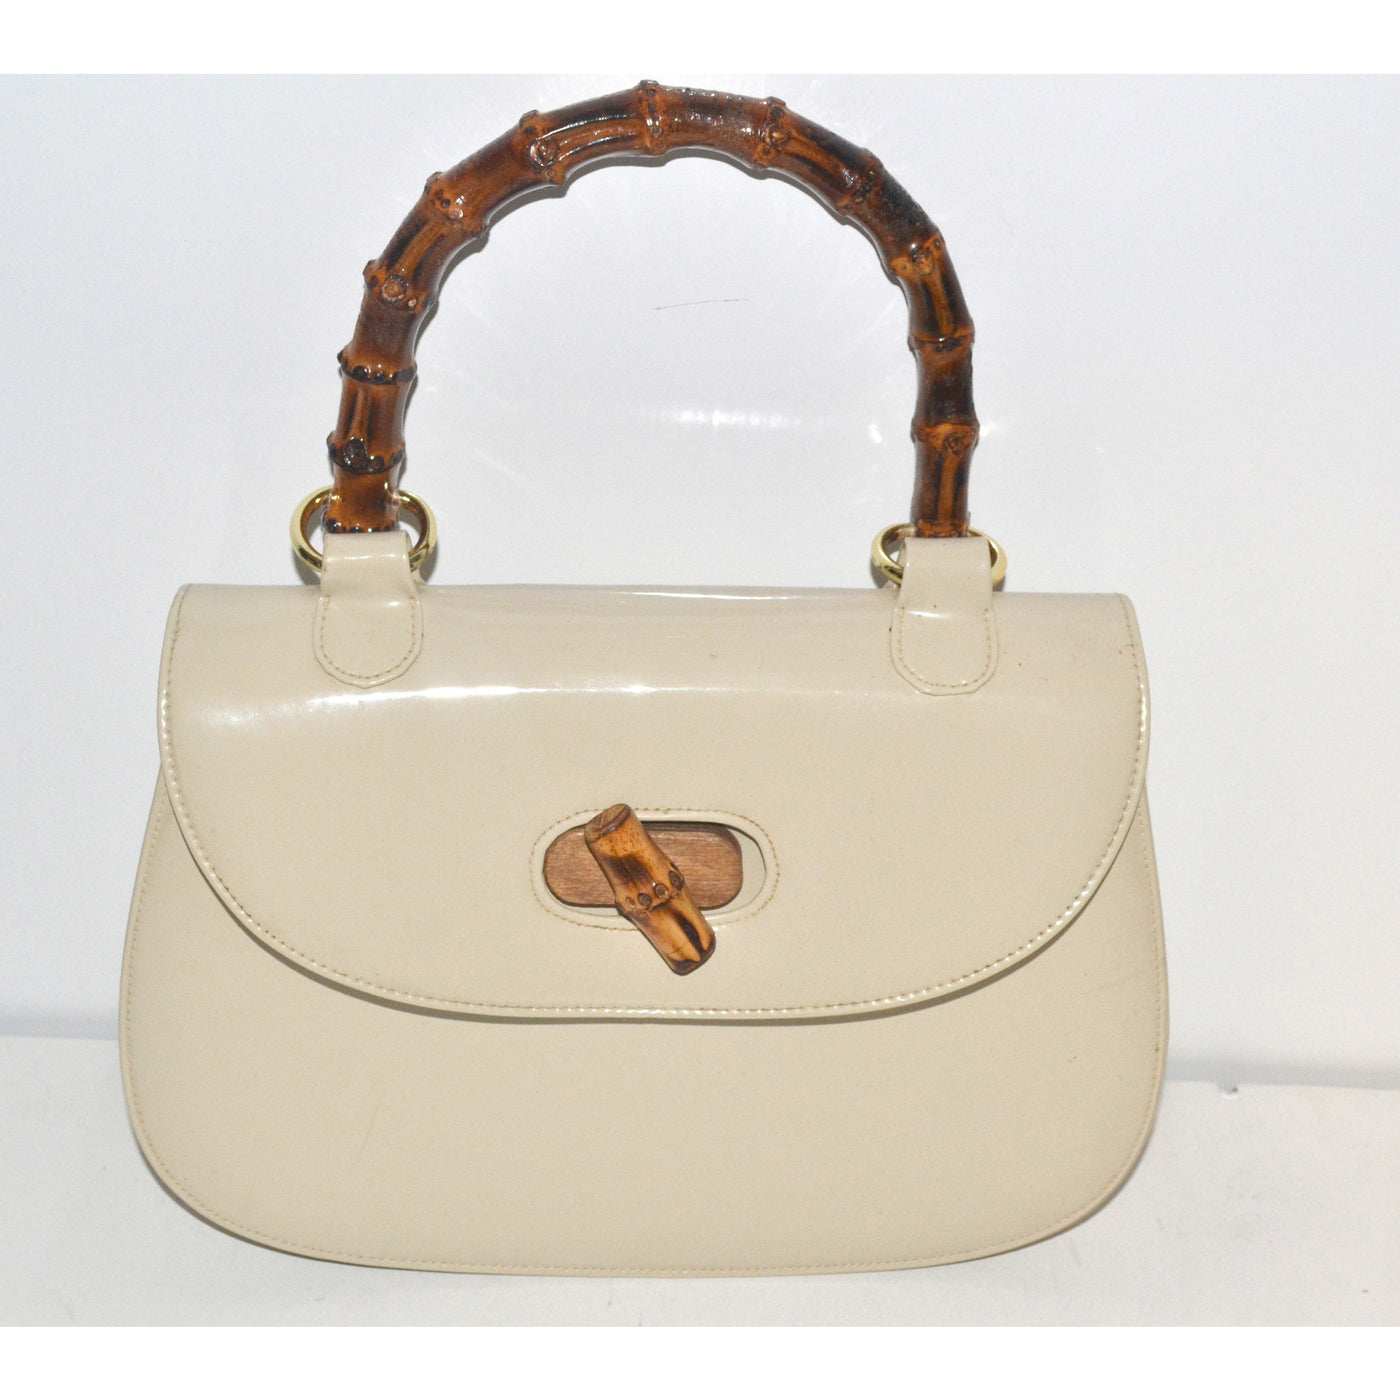 Vintage Gucci Style Patent Leather Bamboo Purse By Bonwit Teller 